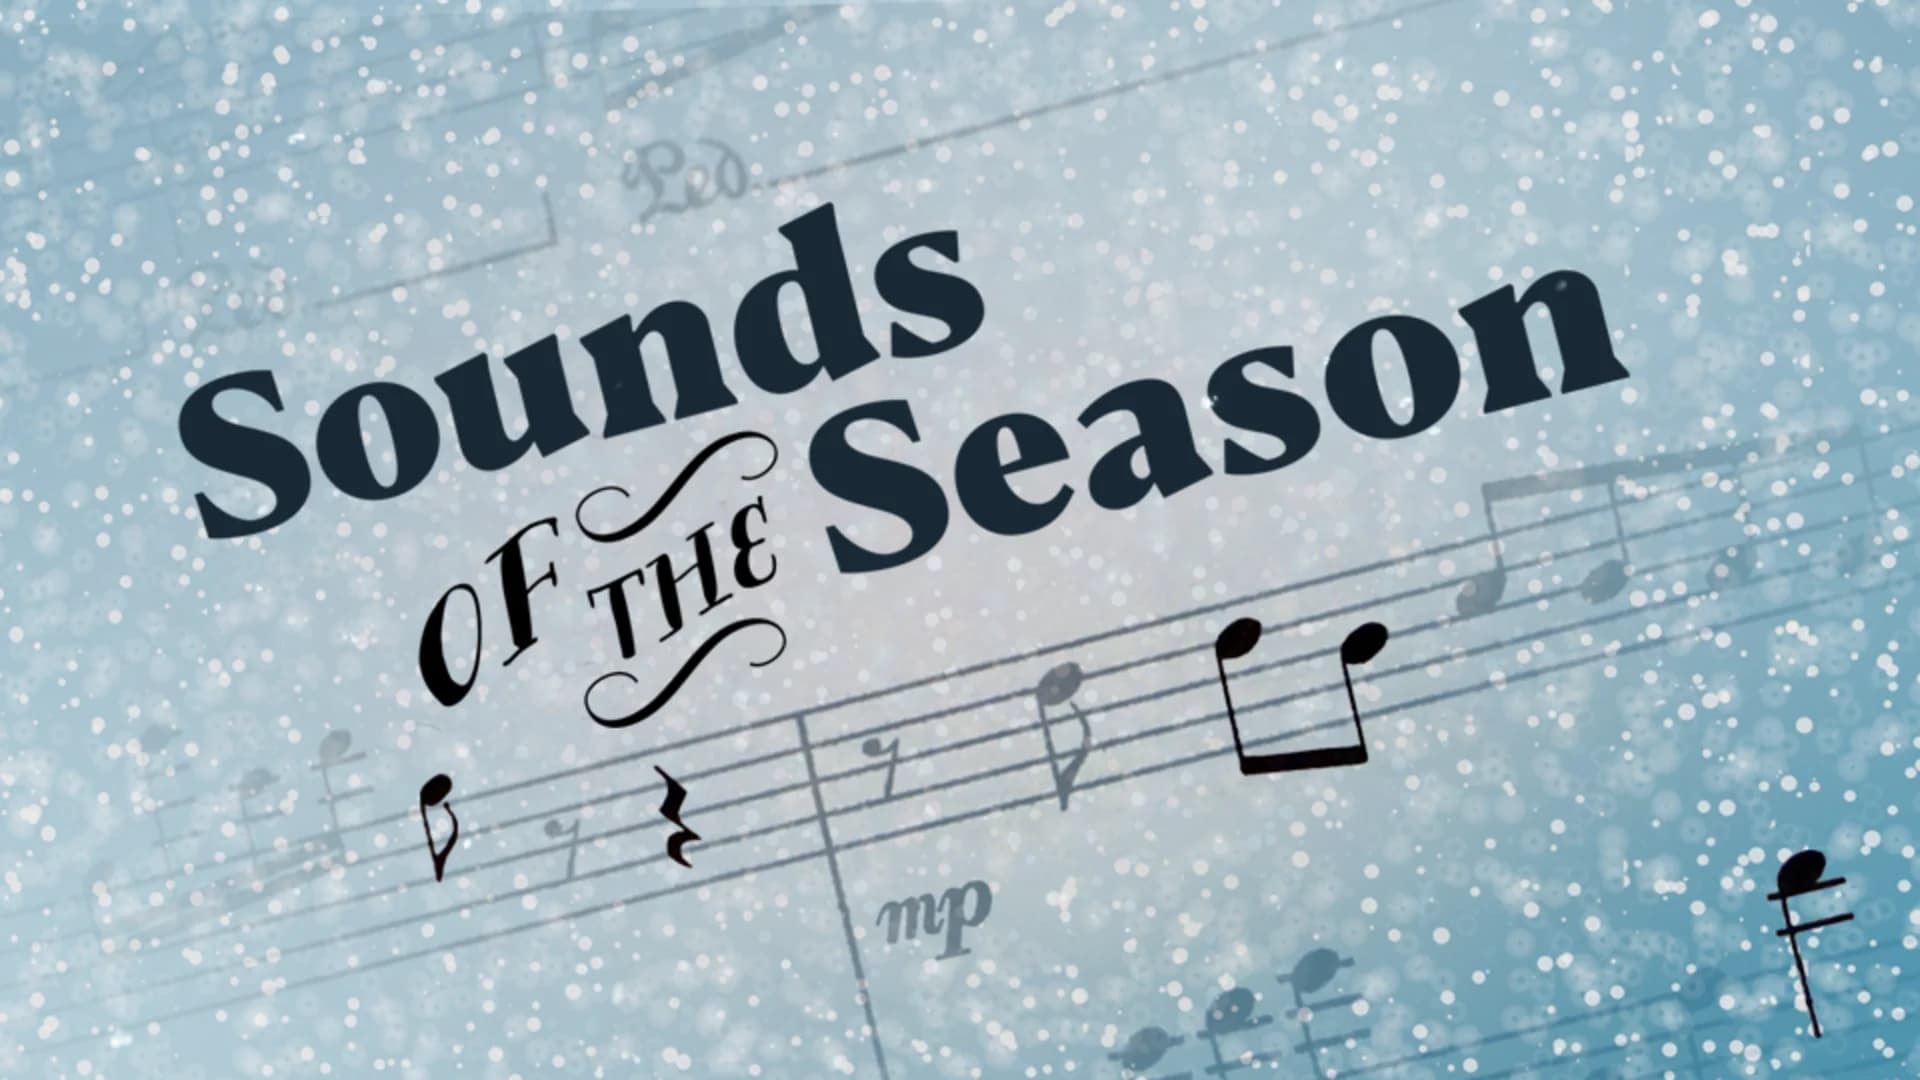 Sounds of the Season 2019 Schedule